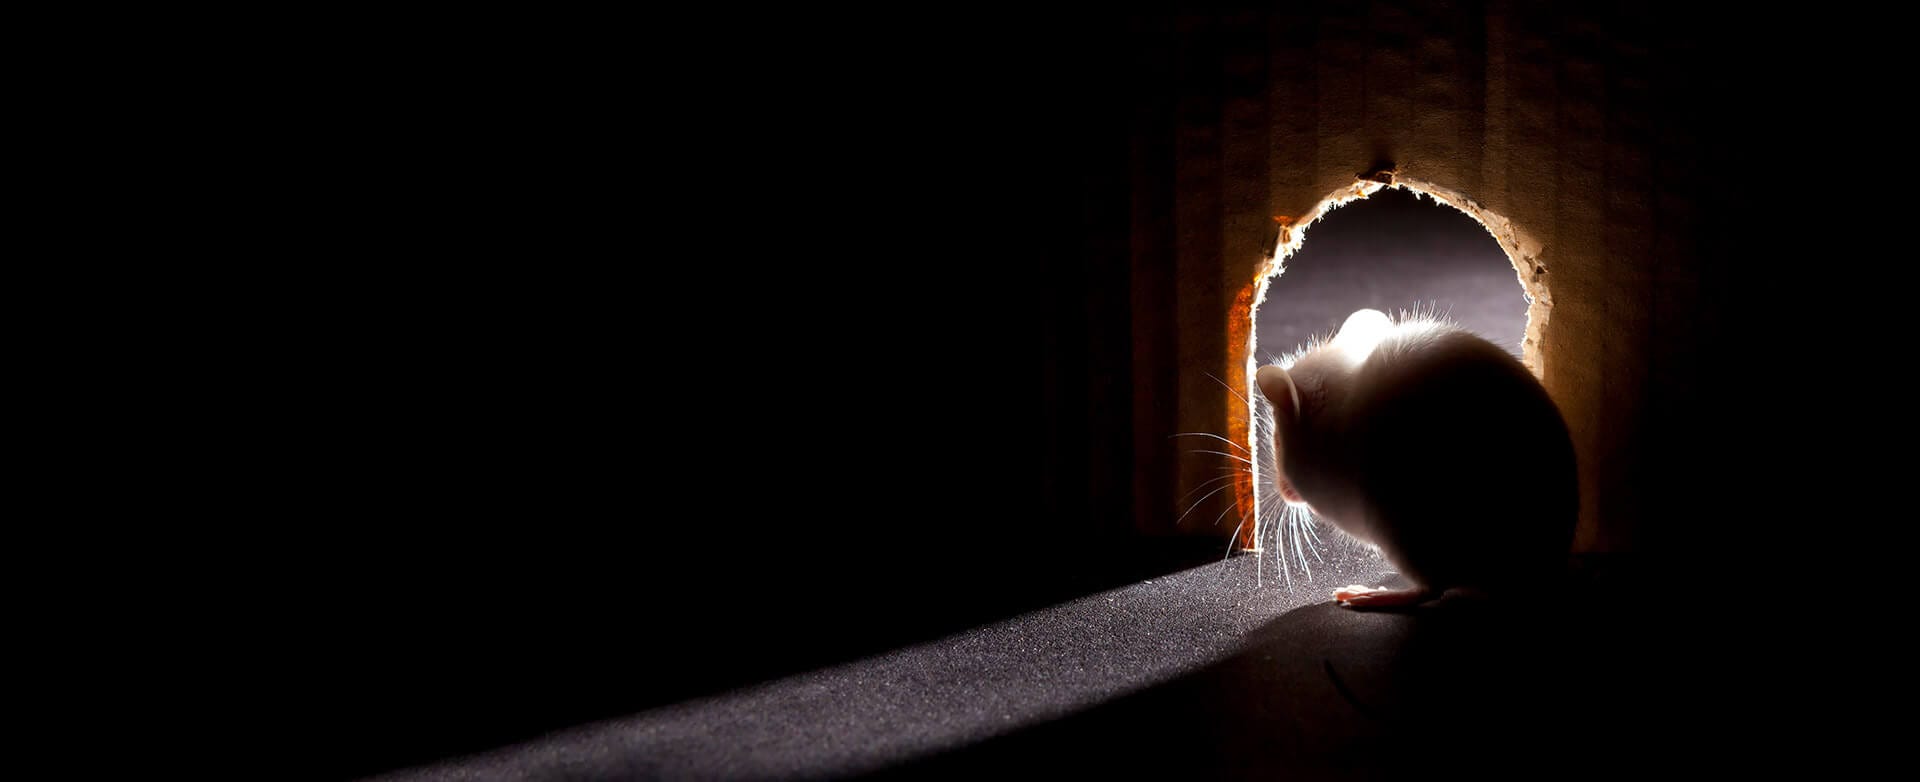 Mouse in the shadows looking through a mouse hole.